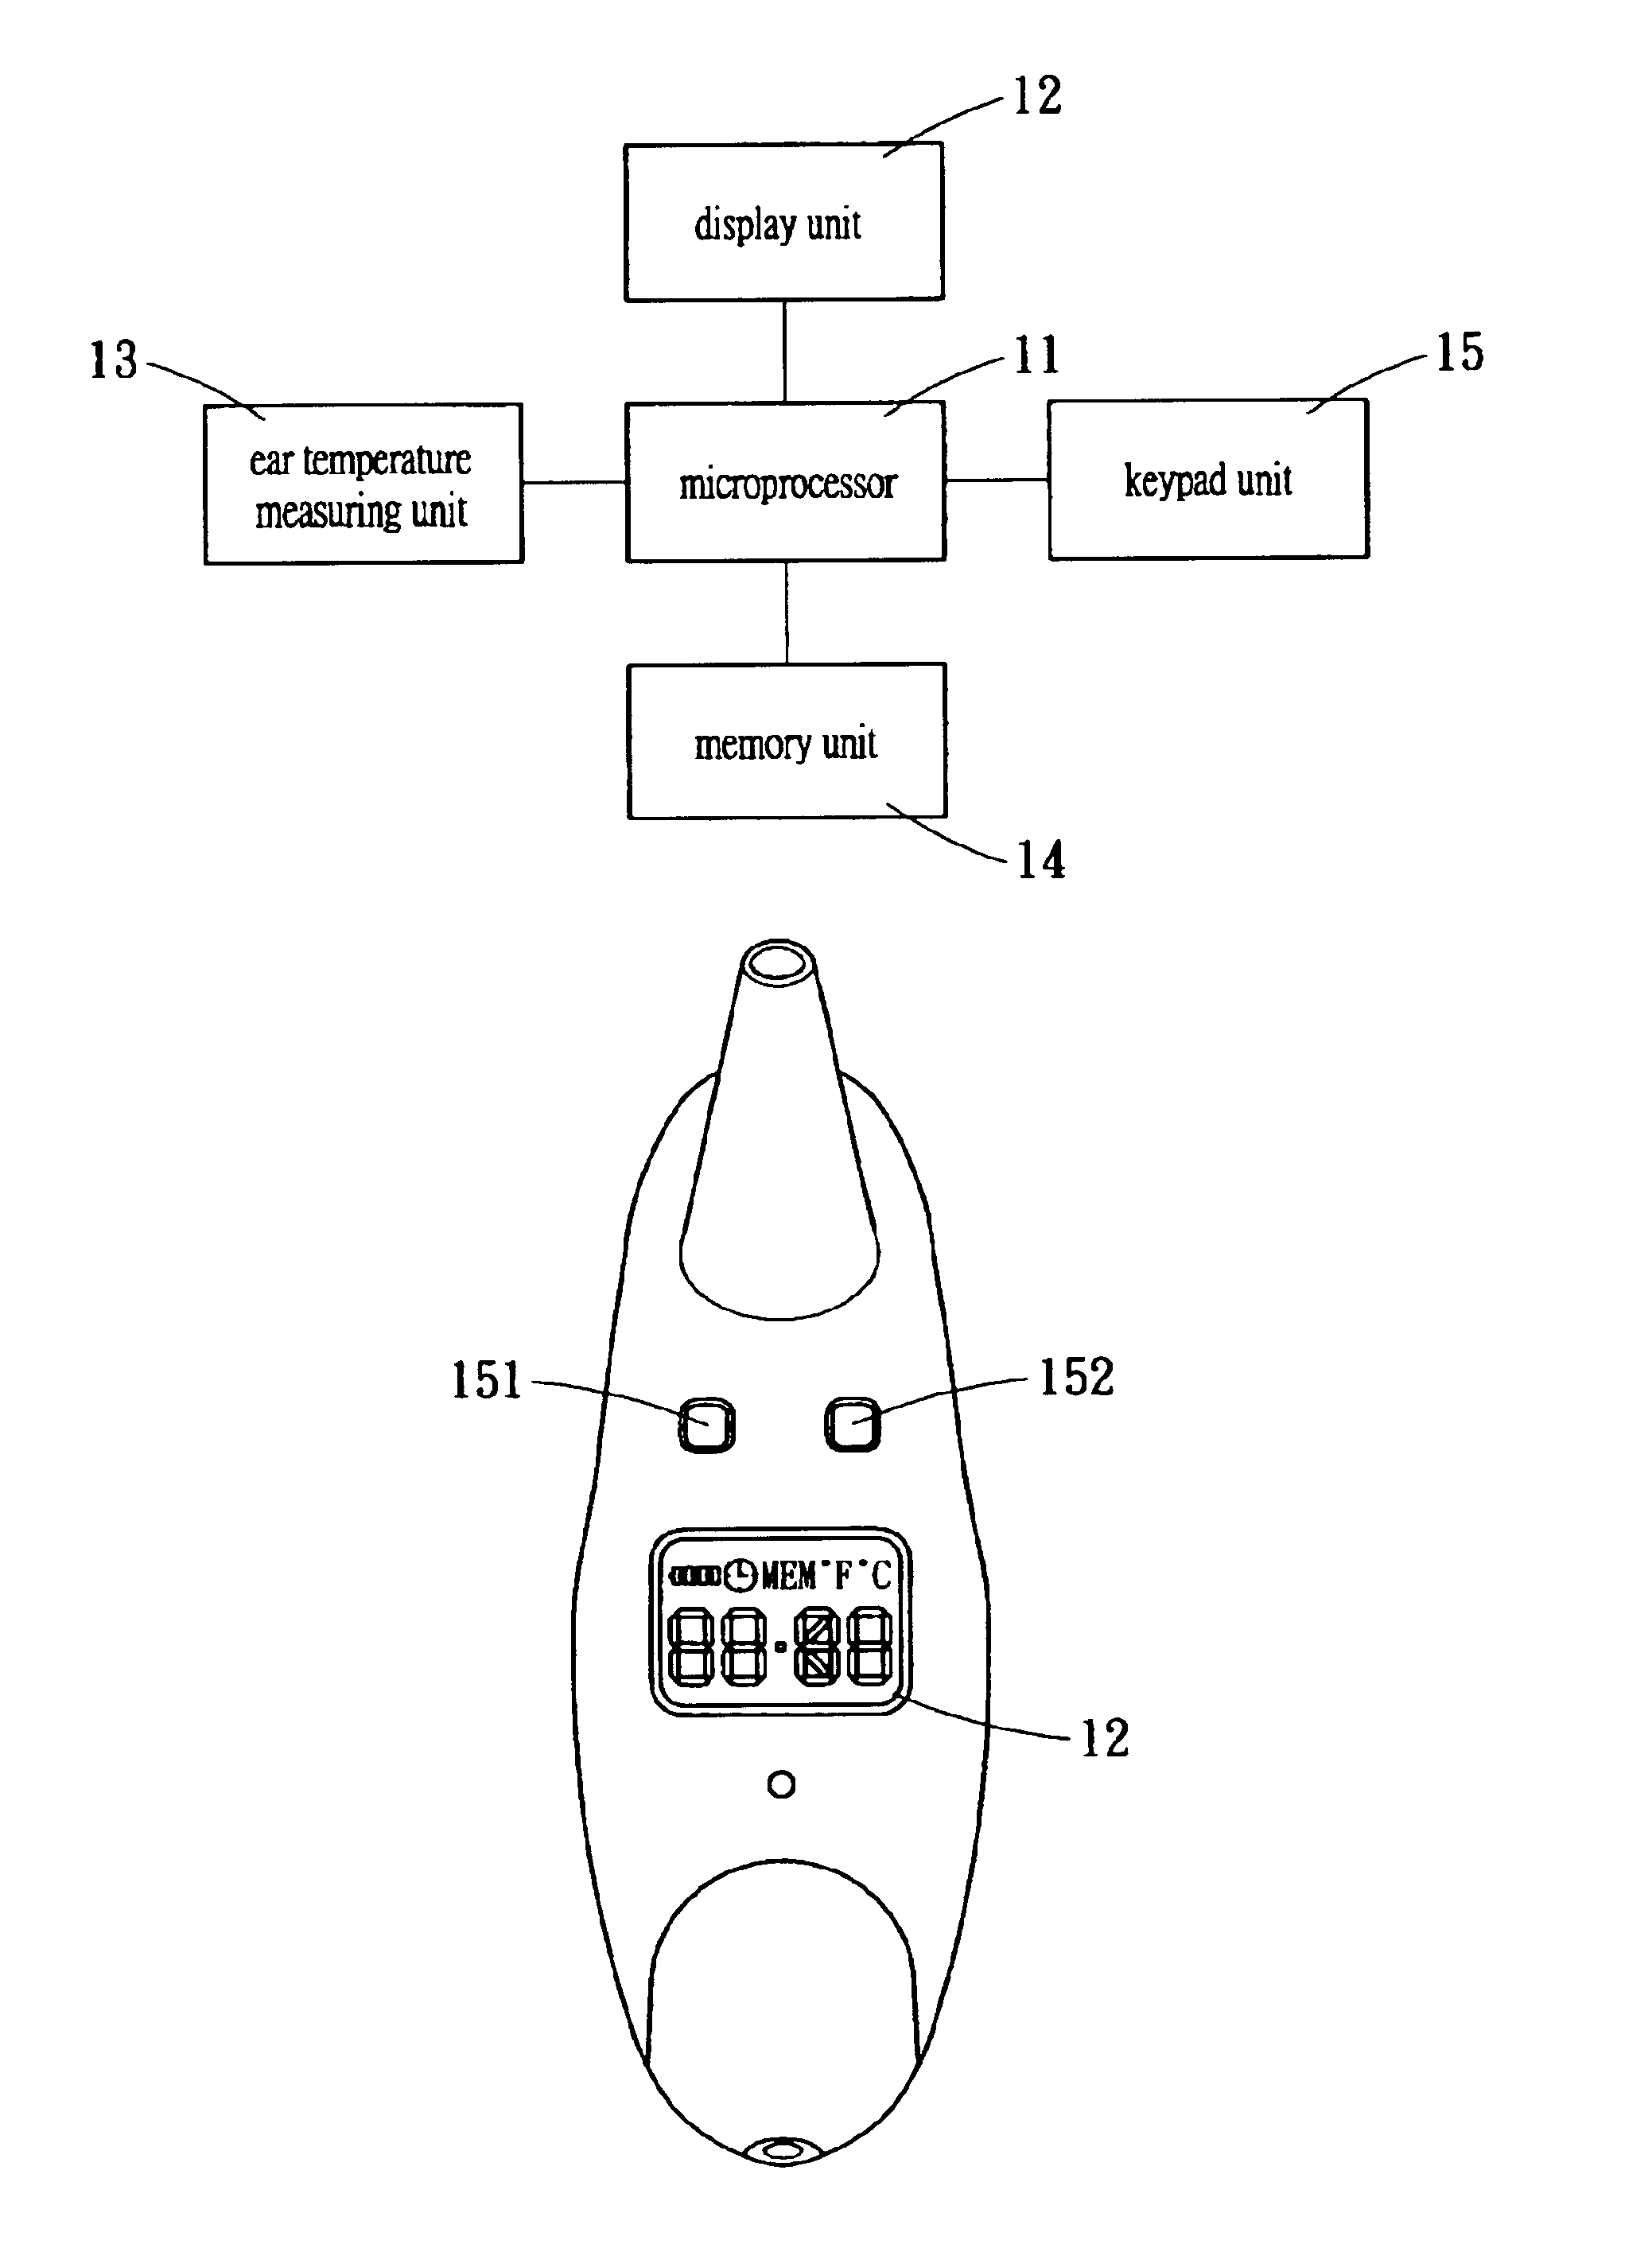 Electronic ear thermometer with multiple measurement and memory function